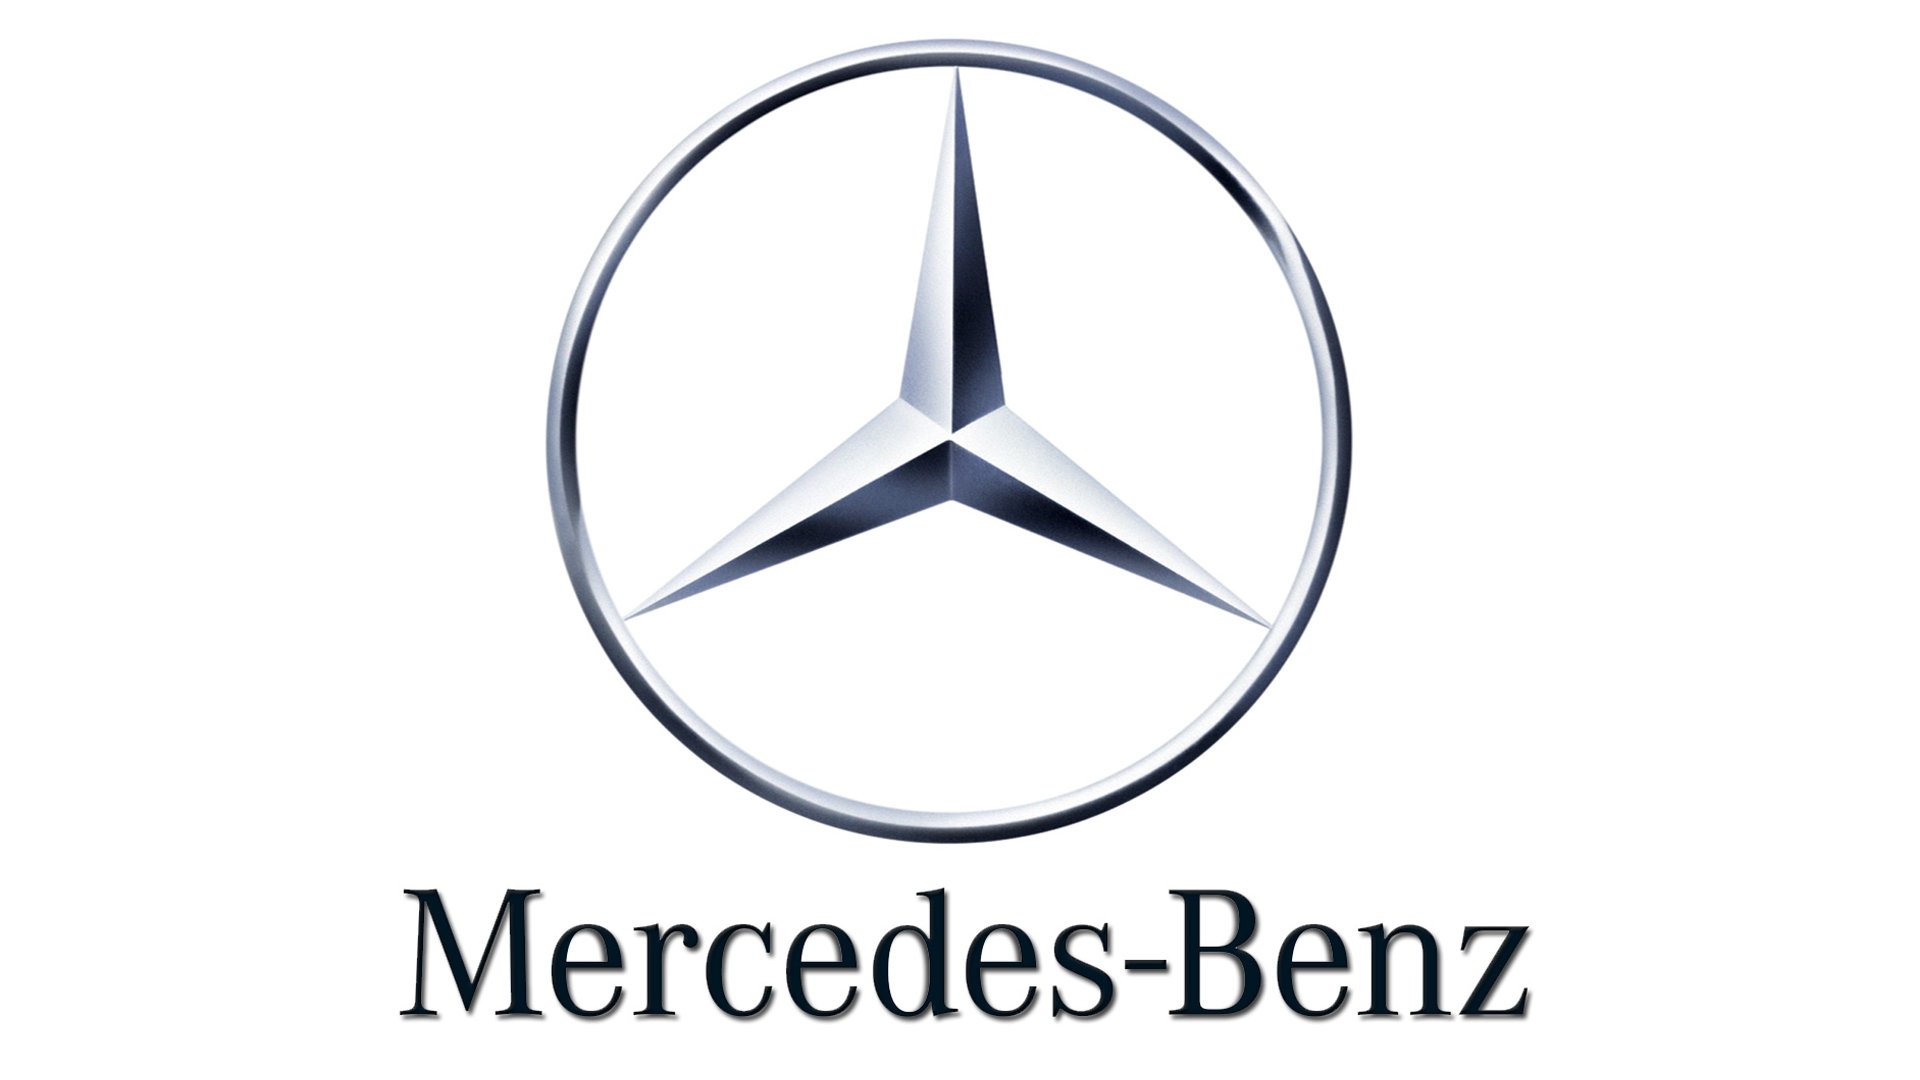 The Mercedes-Benz Logo Meaning  The Mercedes-Benz 3-Pointed Star